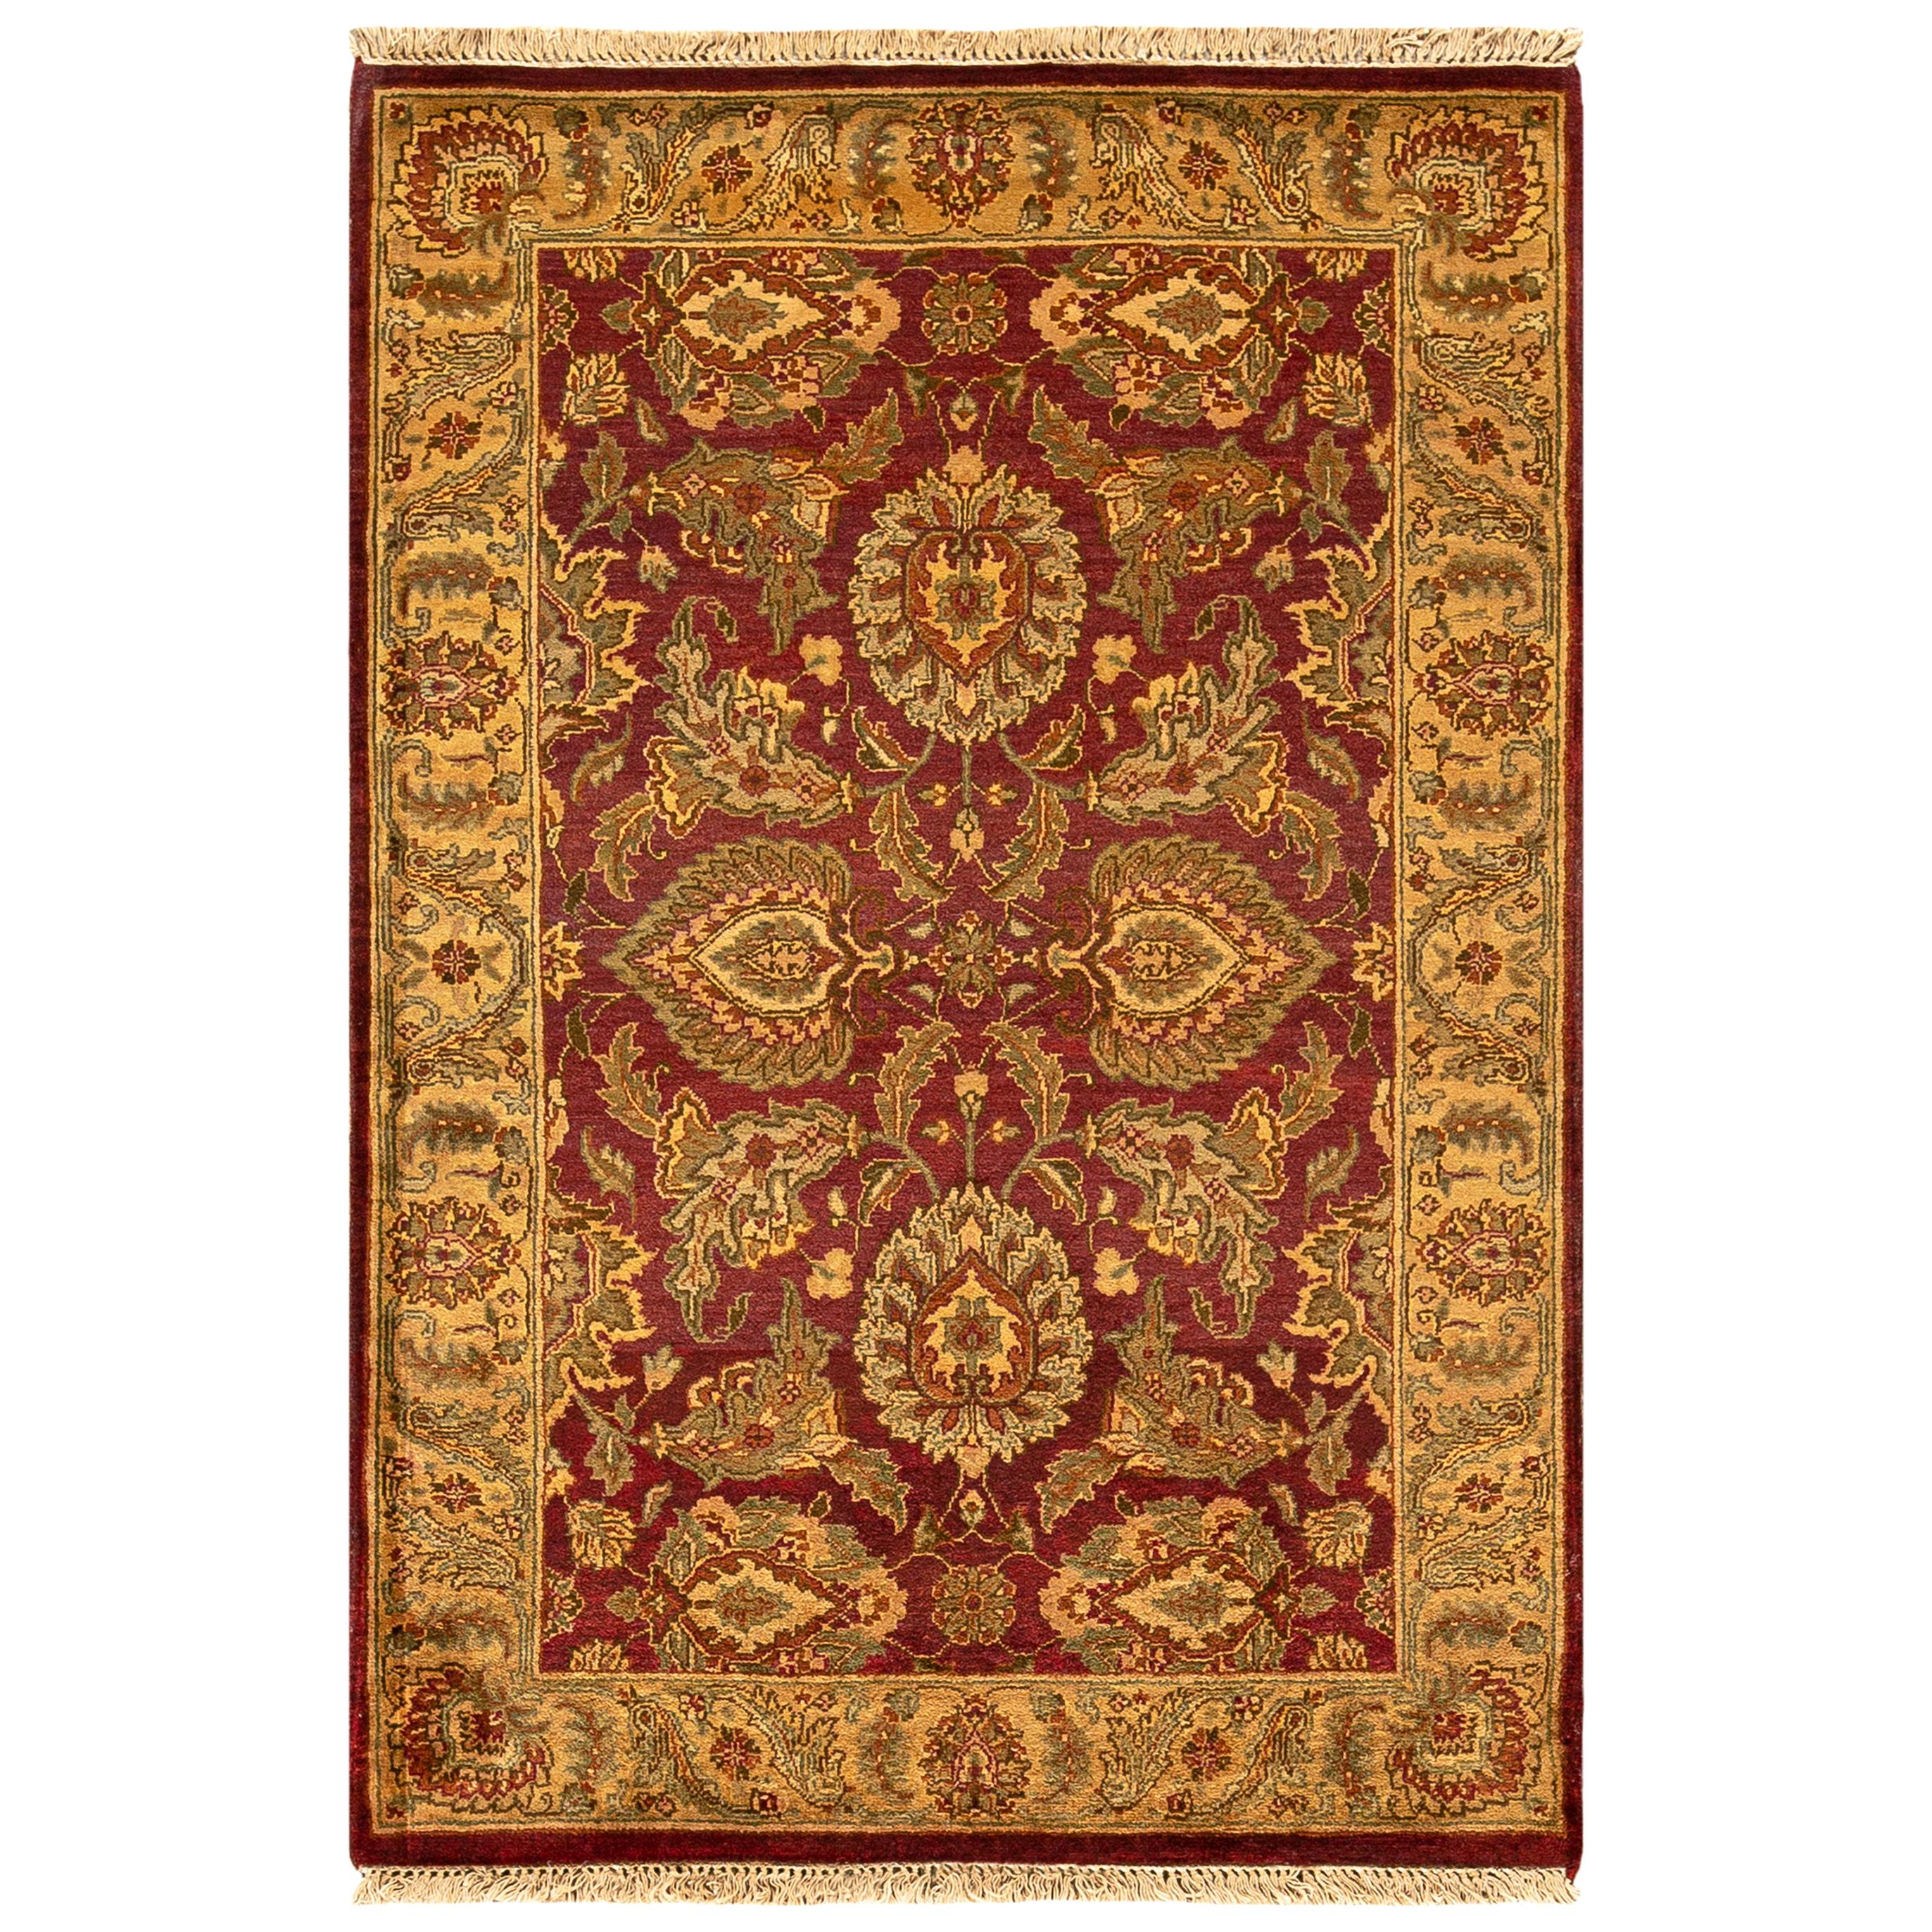 One of a Kind Traditional Handwoven Wool Area Rug